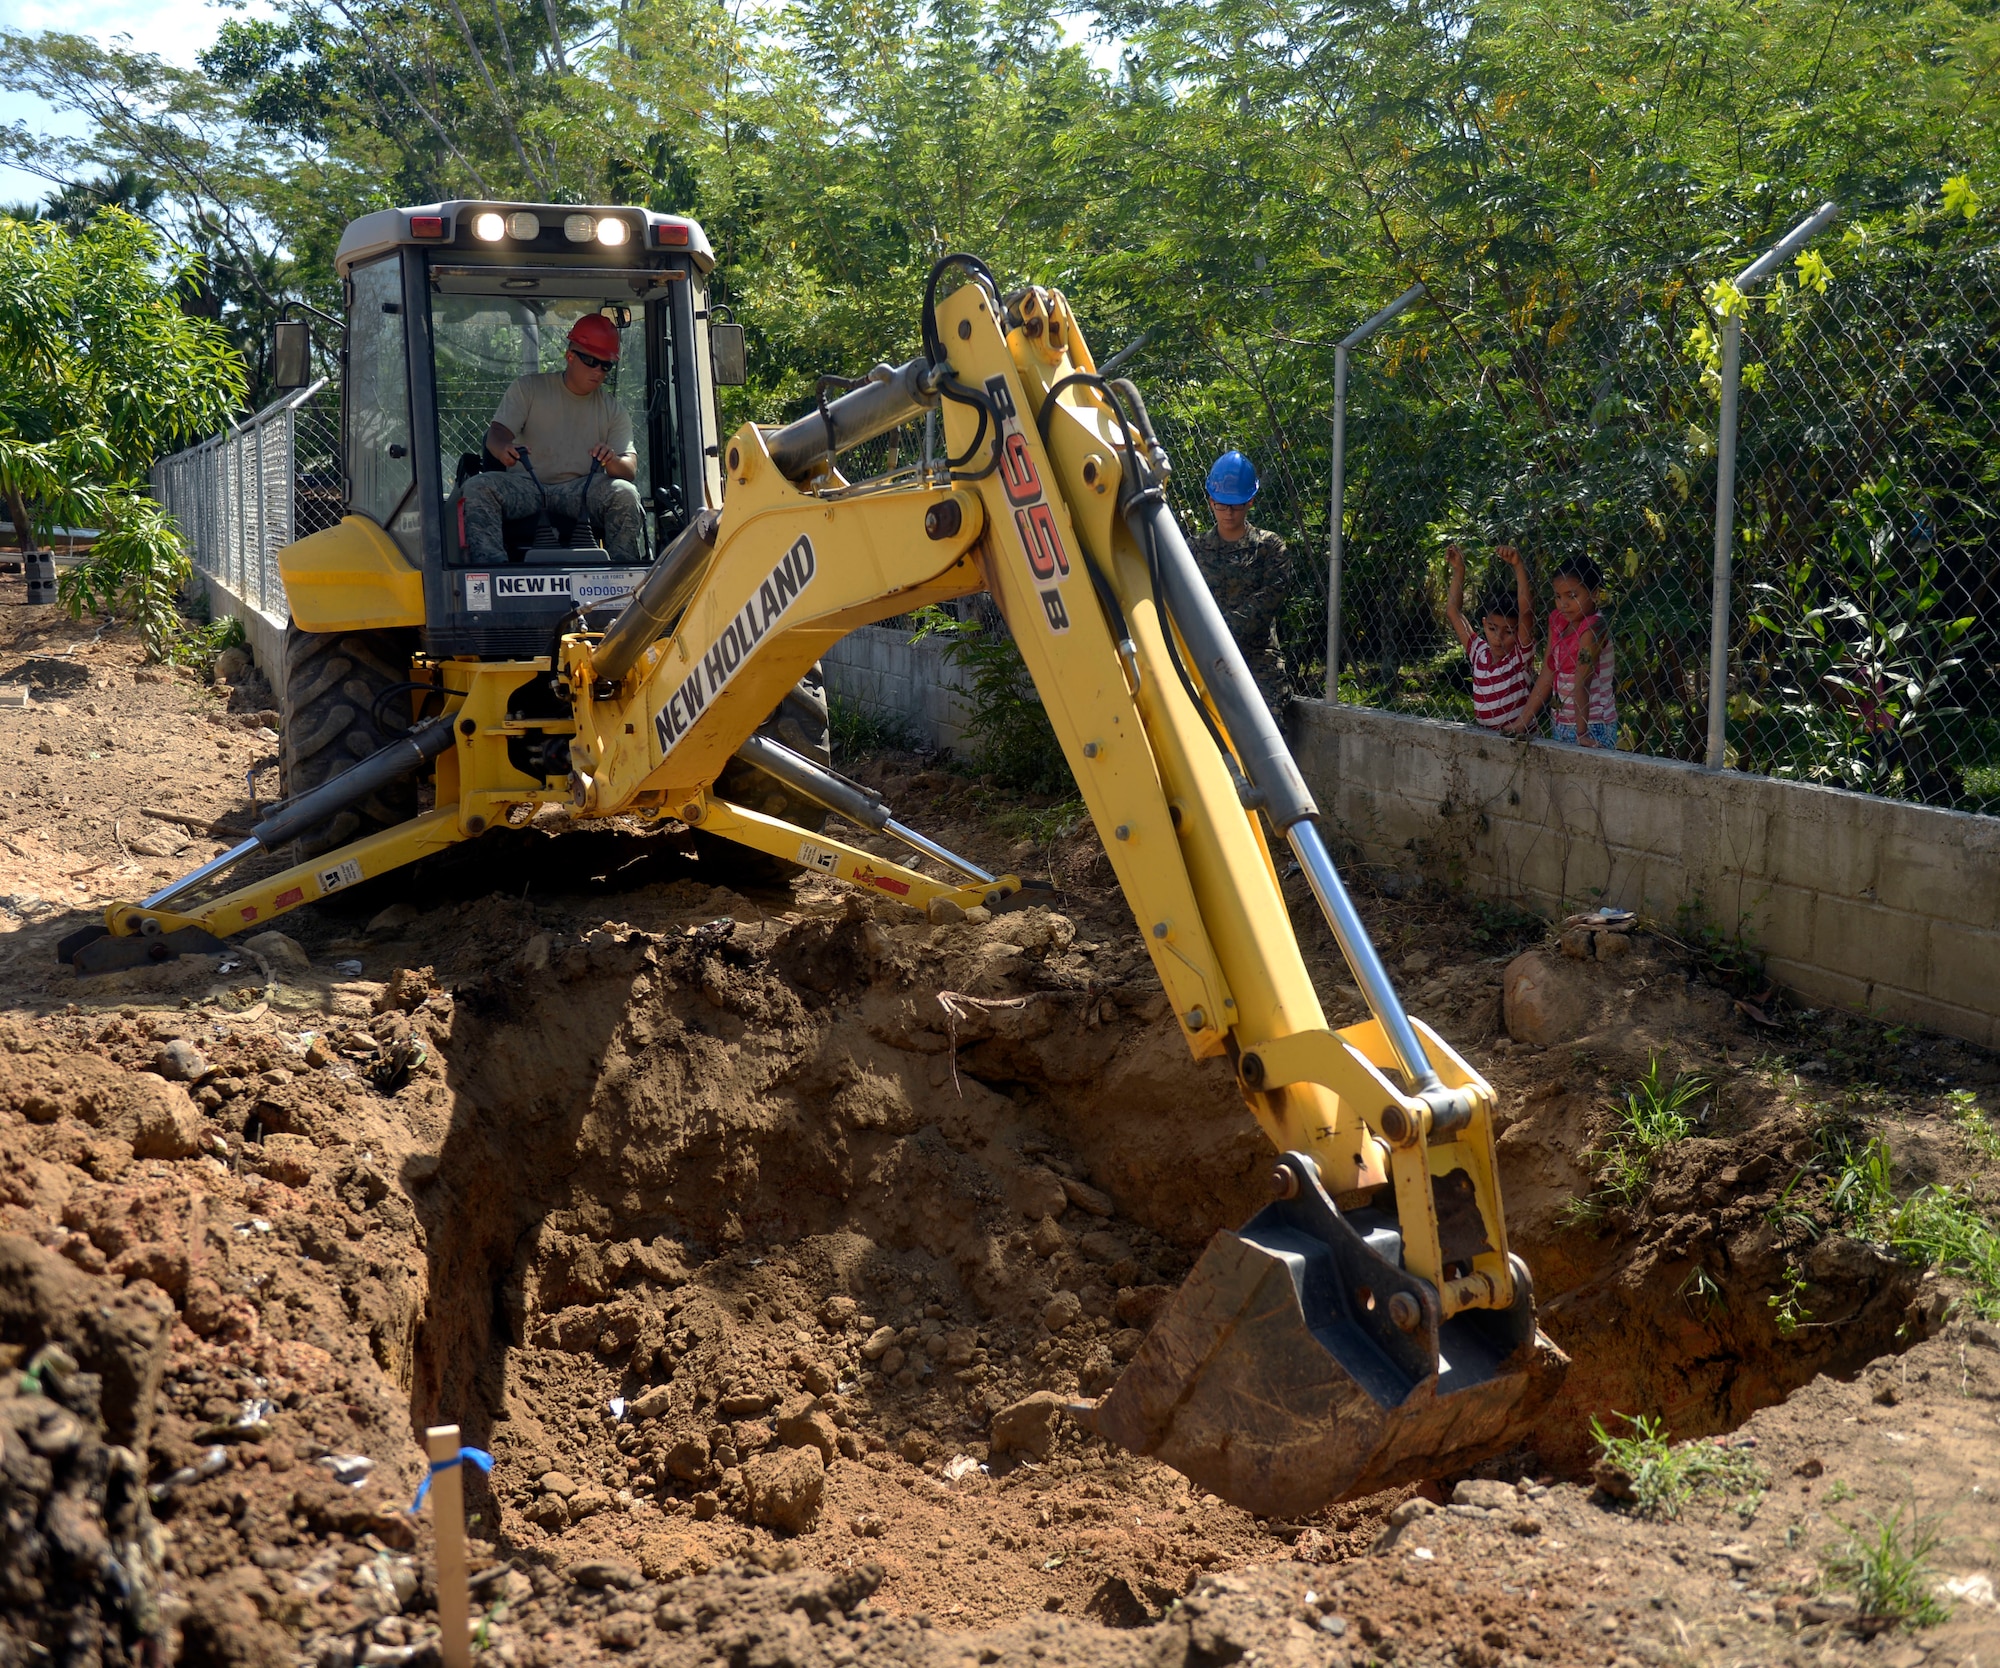 U.S. Air Force Staff Sgt. Michael Zemke, 823rd Expeditionary RED HORSE Squadron, out of Hurlburt Field, Fla., pavements and heavy equipment operator and Hilo, Hawaii native, move dirt for a septic system at the Gabriela Mistral primary school in Ocotoes Alto, Honduras, June 1, 2015. The school project is one part of the New Horizons Honduras 2015, an annual humanitarian and training exercise put on by U.S. Southern Command. New Horizons was launched in the 1980s and is an annual joint humanitarian assistance exercise that U.S. Southern Command conducts with a partner nation in Central America, South America or the Caribbean. The exercise improves joint training readiness of U.S. and partner nation civil engineers, medical professionals and support personnel through humanitarian assistance activities. (U.S. Air Force photo by Capt. David J. Murphy/Released)